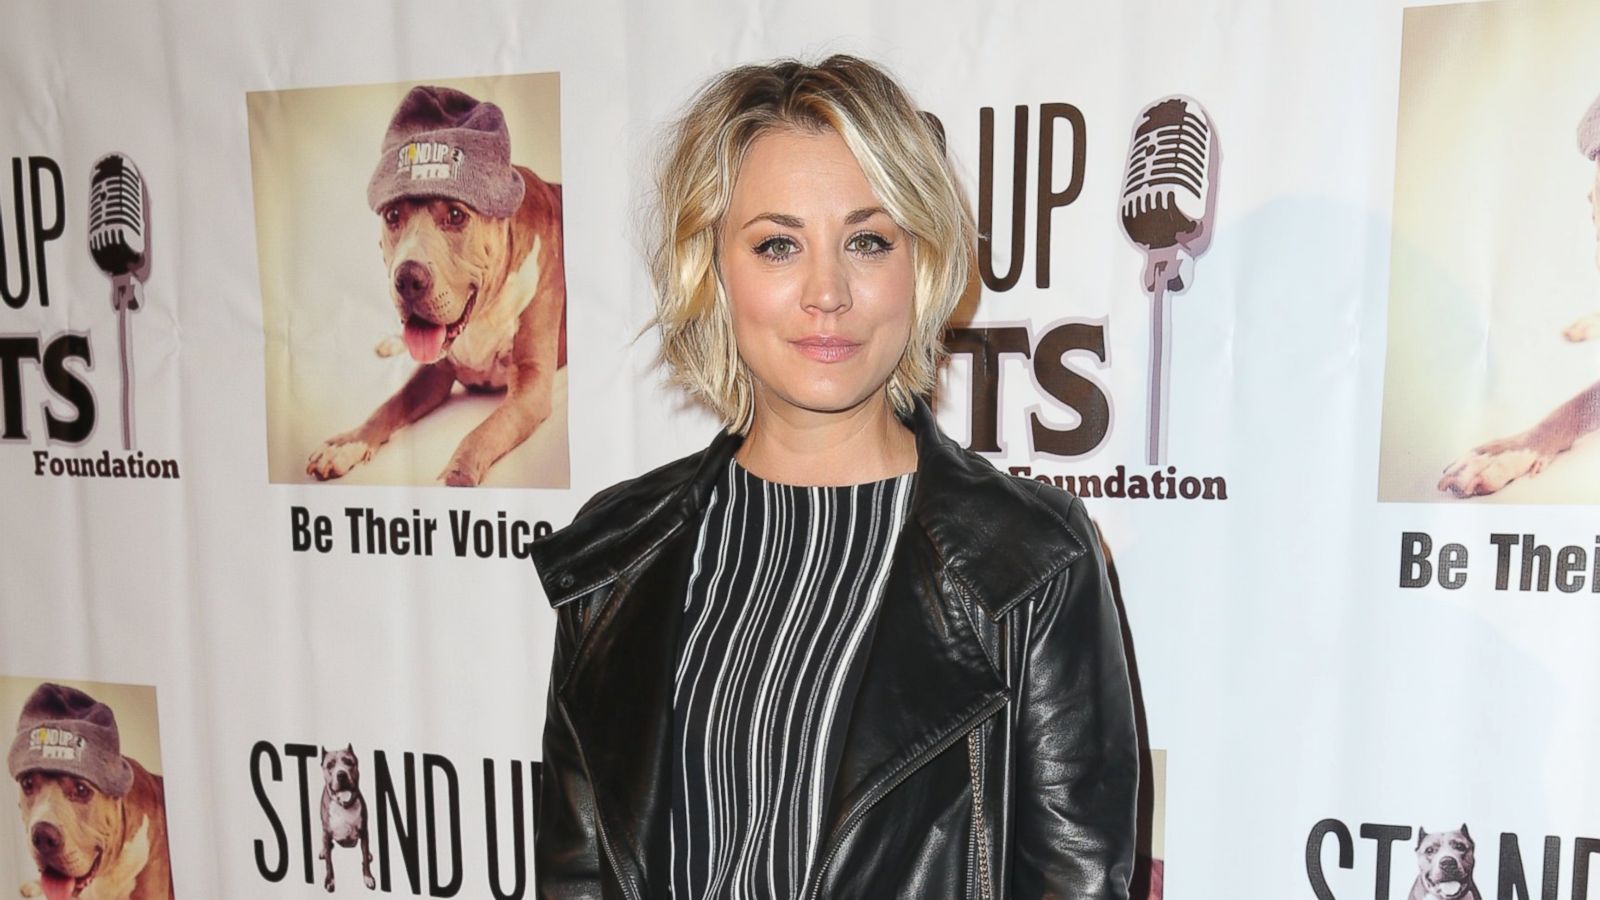 Kaley Cuoco Gets Real Explaining The Significance Of Her New Tattoo   HuffPost Entertainment